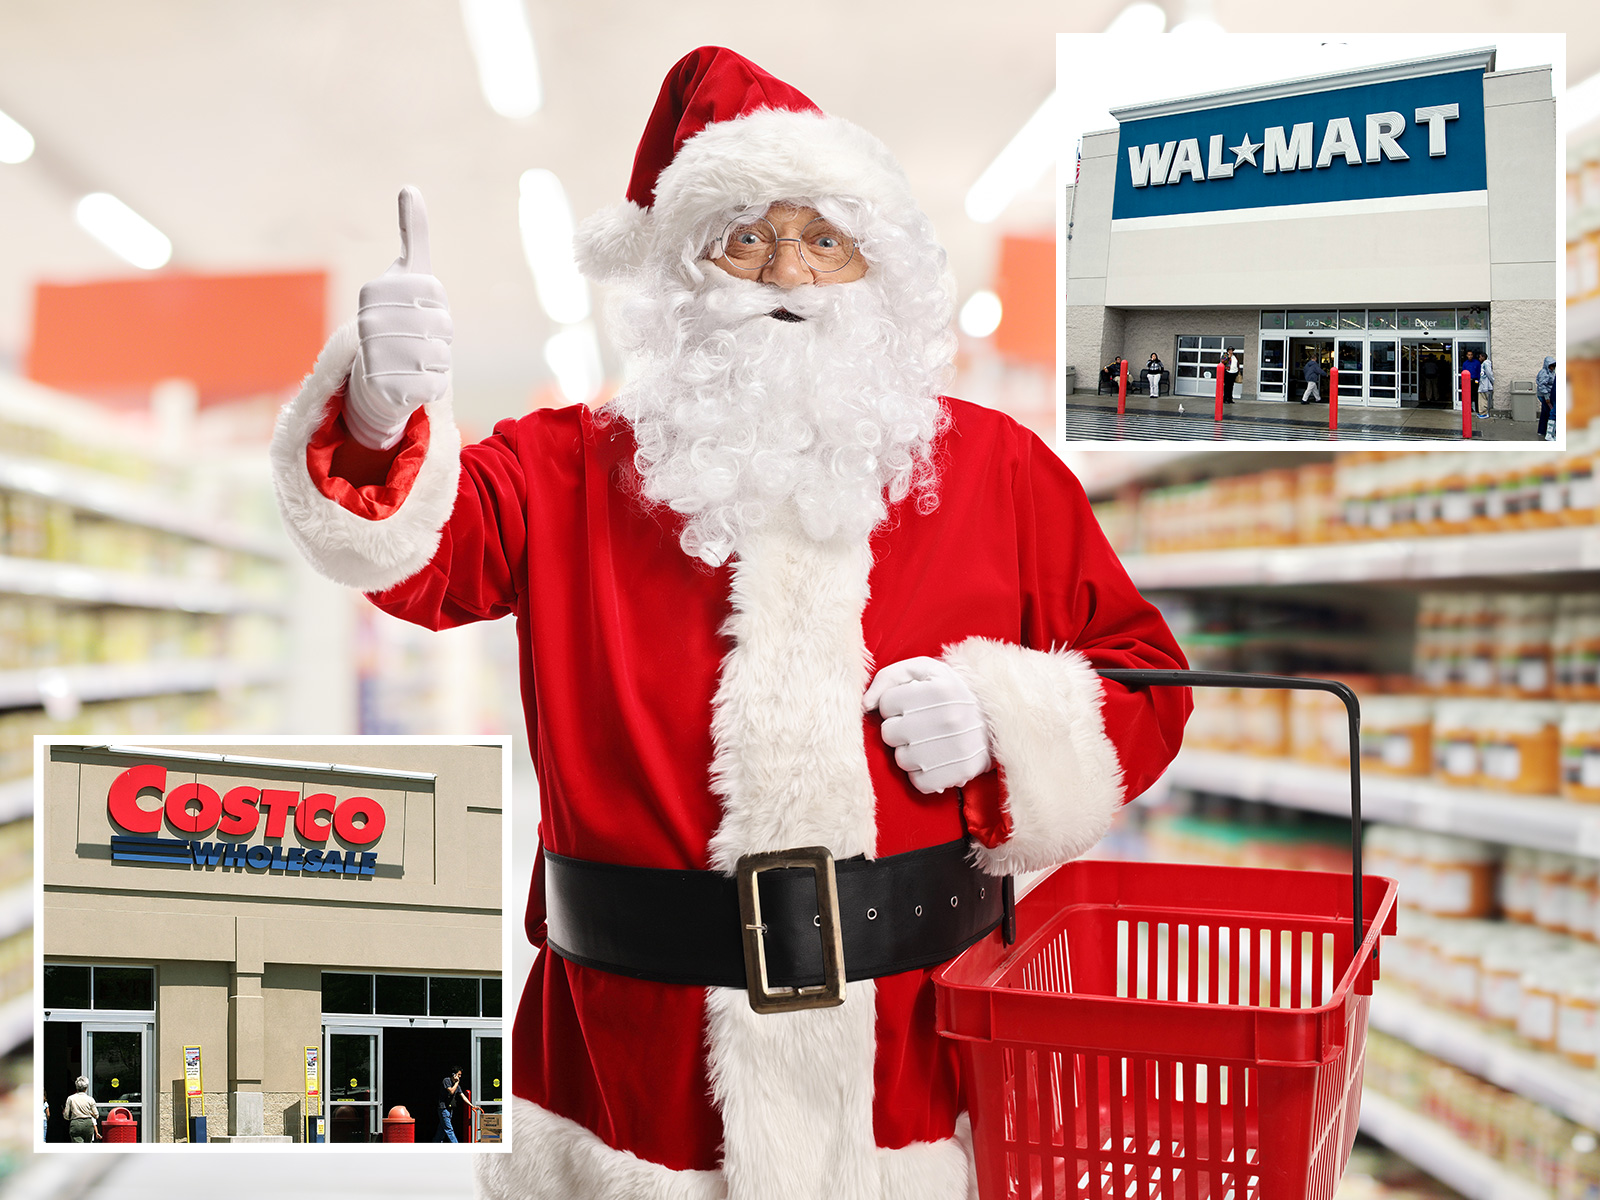 What Stores Are Open on Christmas Eve and Day? Target, Walmart and Costco